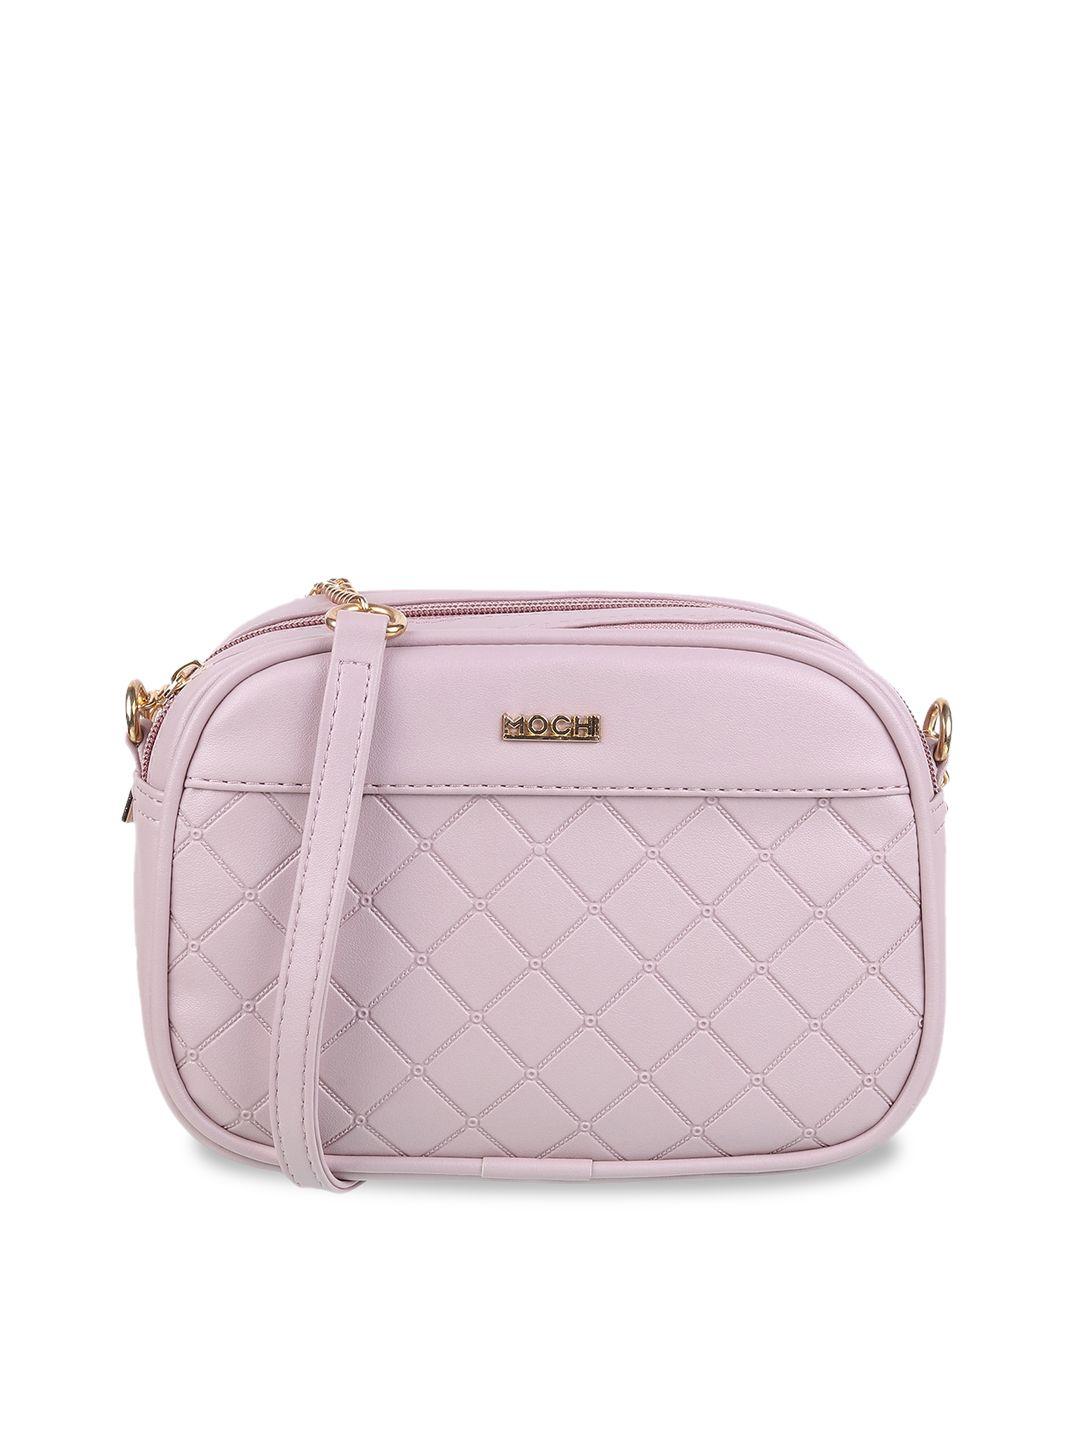 mochi textured structured sling bag with quilted